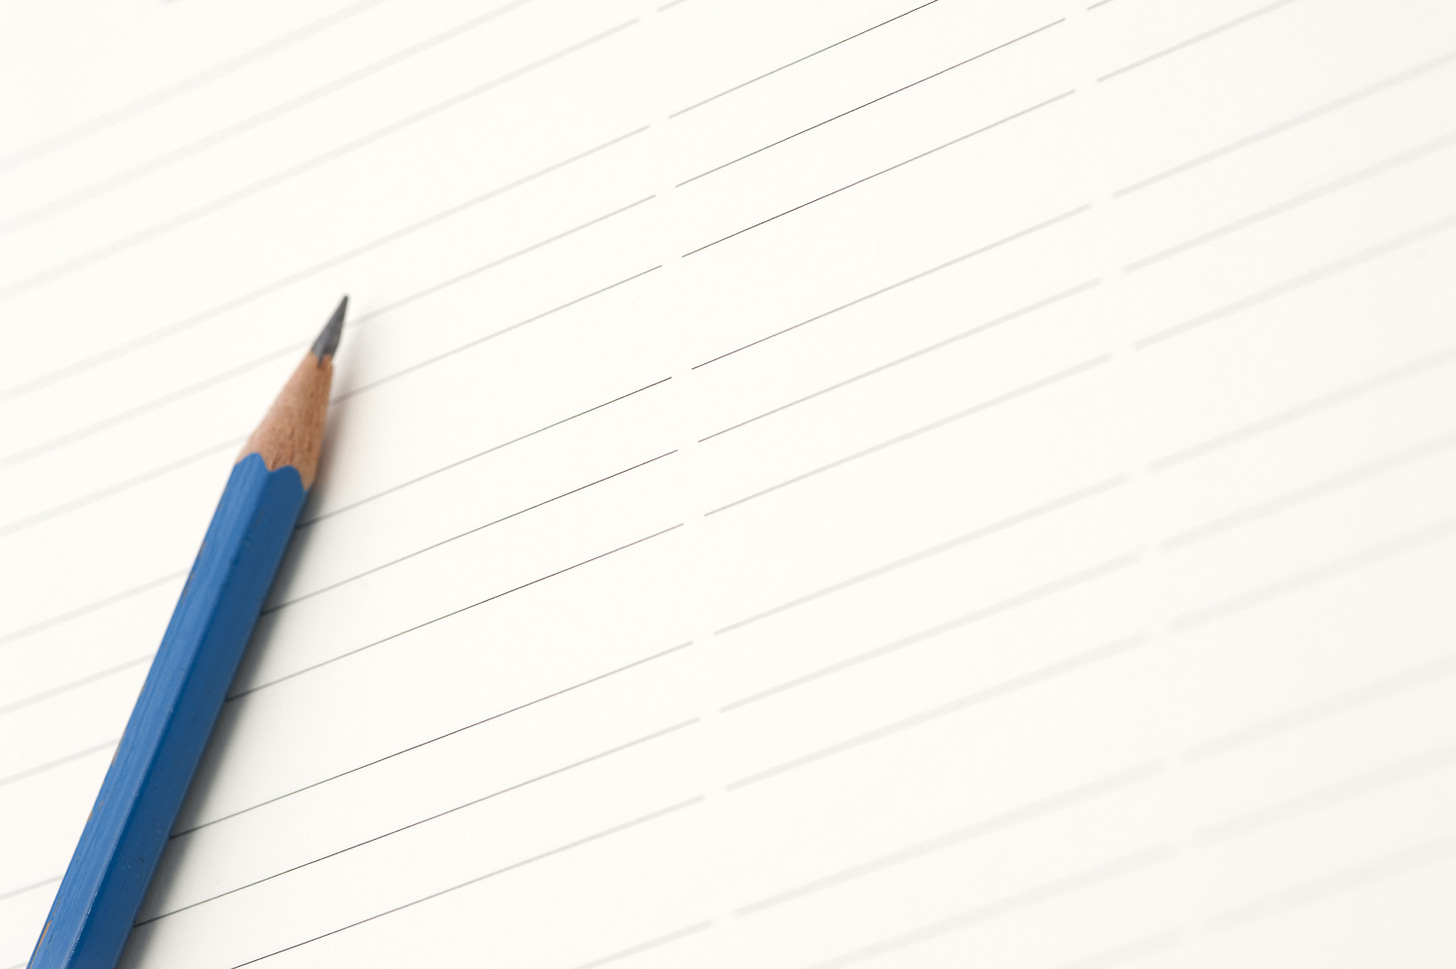 Free image of Sharp blue pencil on lined paper